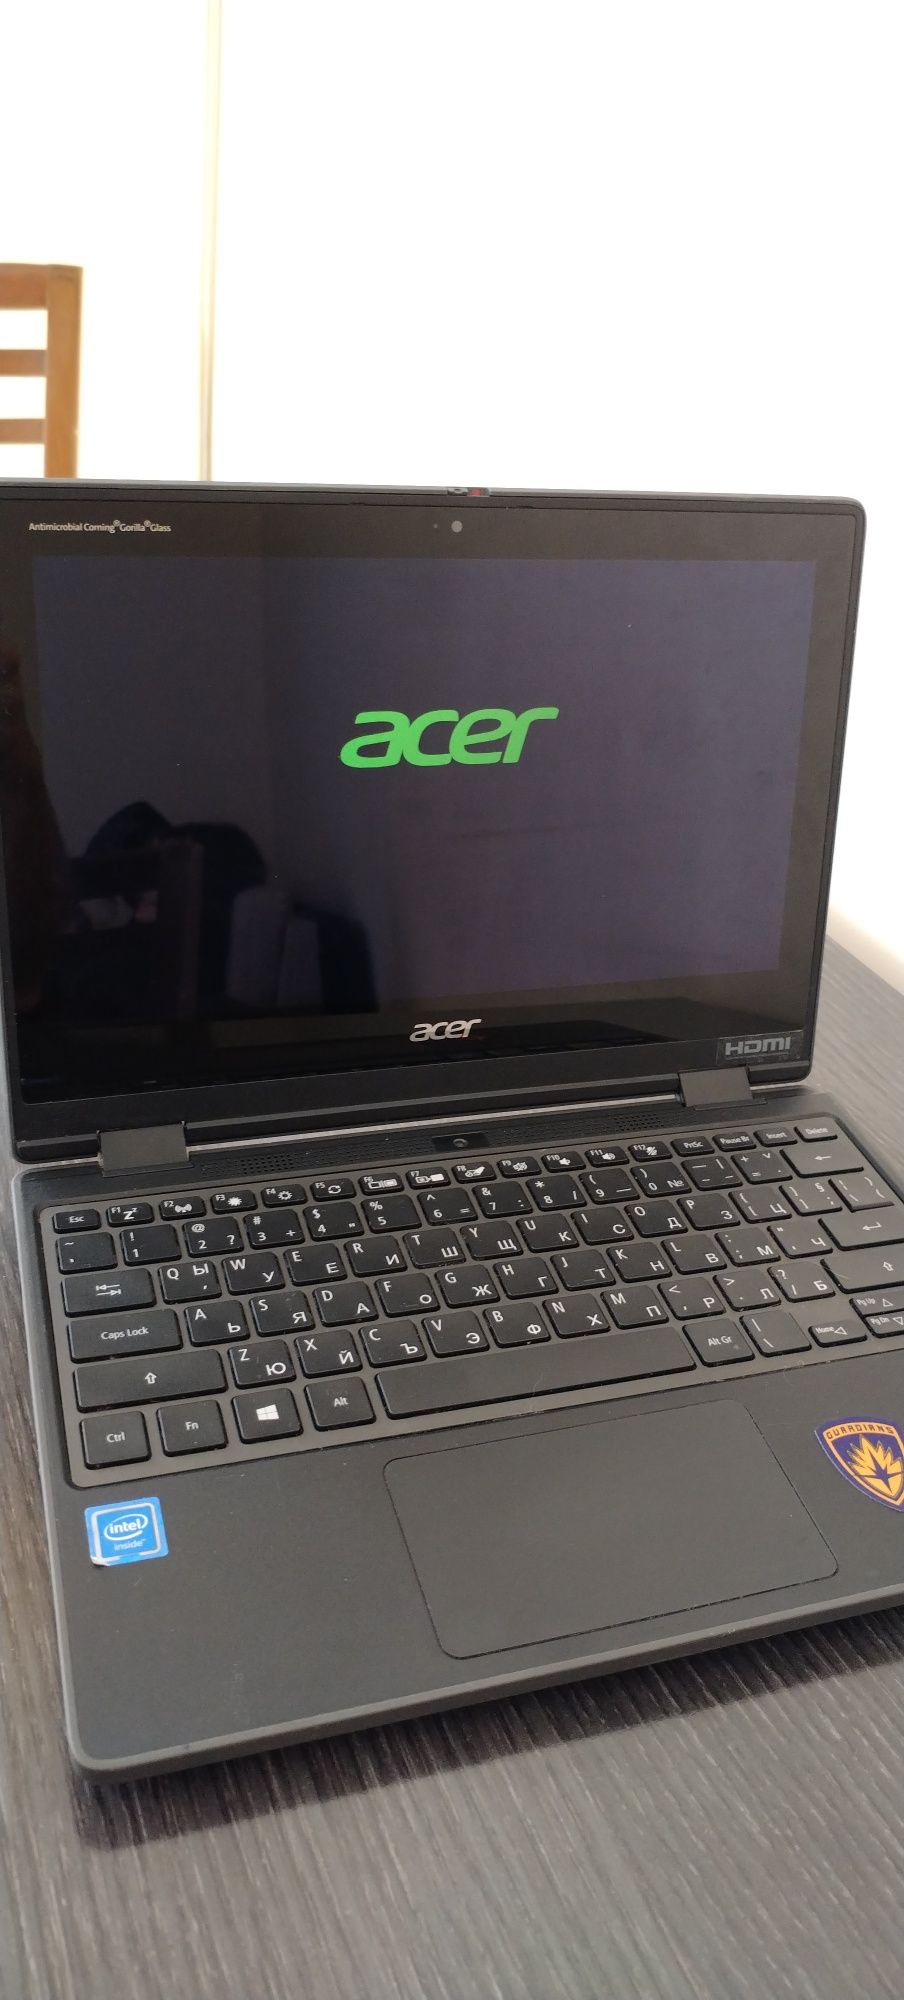 Бизнес лаптоп - Acer B3 Spin с touch screen